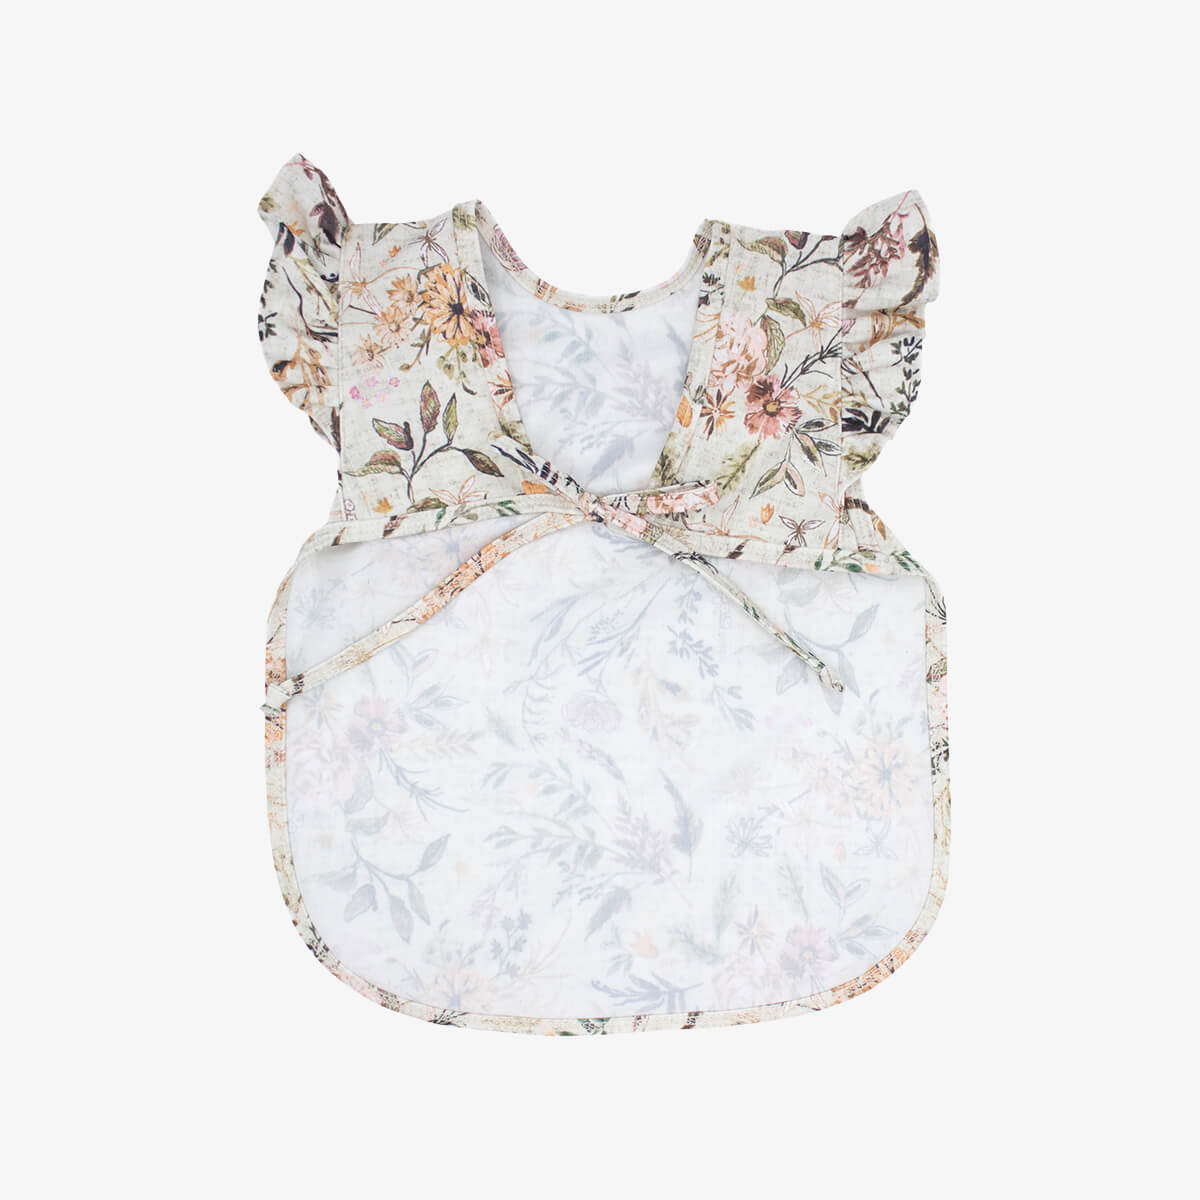 BapronBaby® Bapron in Delilah Floral with Flutter Sleeves / Bib + Apron That Safely Ties Around the Body